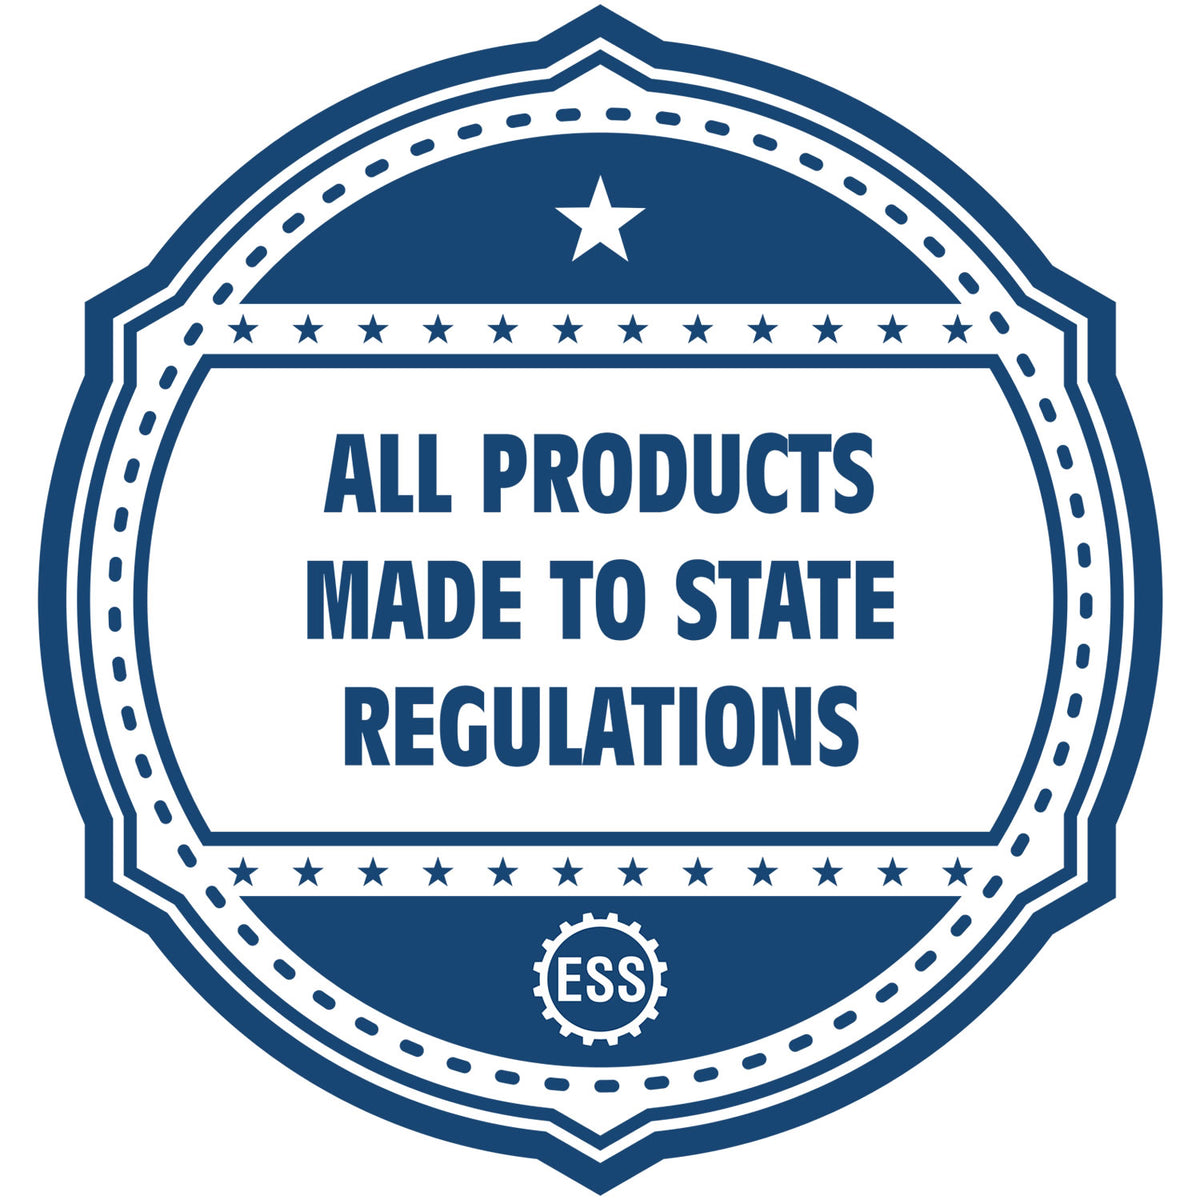 An icon or badge element for the Slim Pre-Inked Colorado Professional Engineer Seal Stamp showing that this product is made in compliance with state regulations.